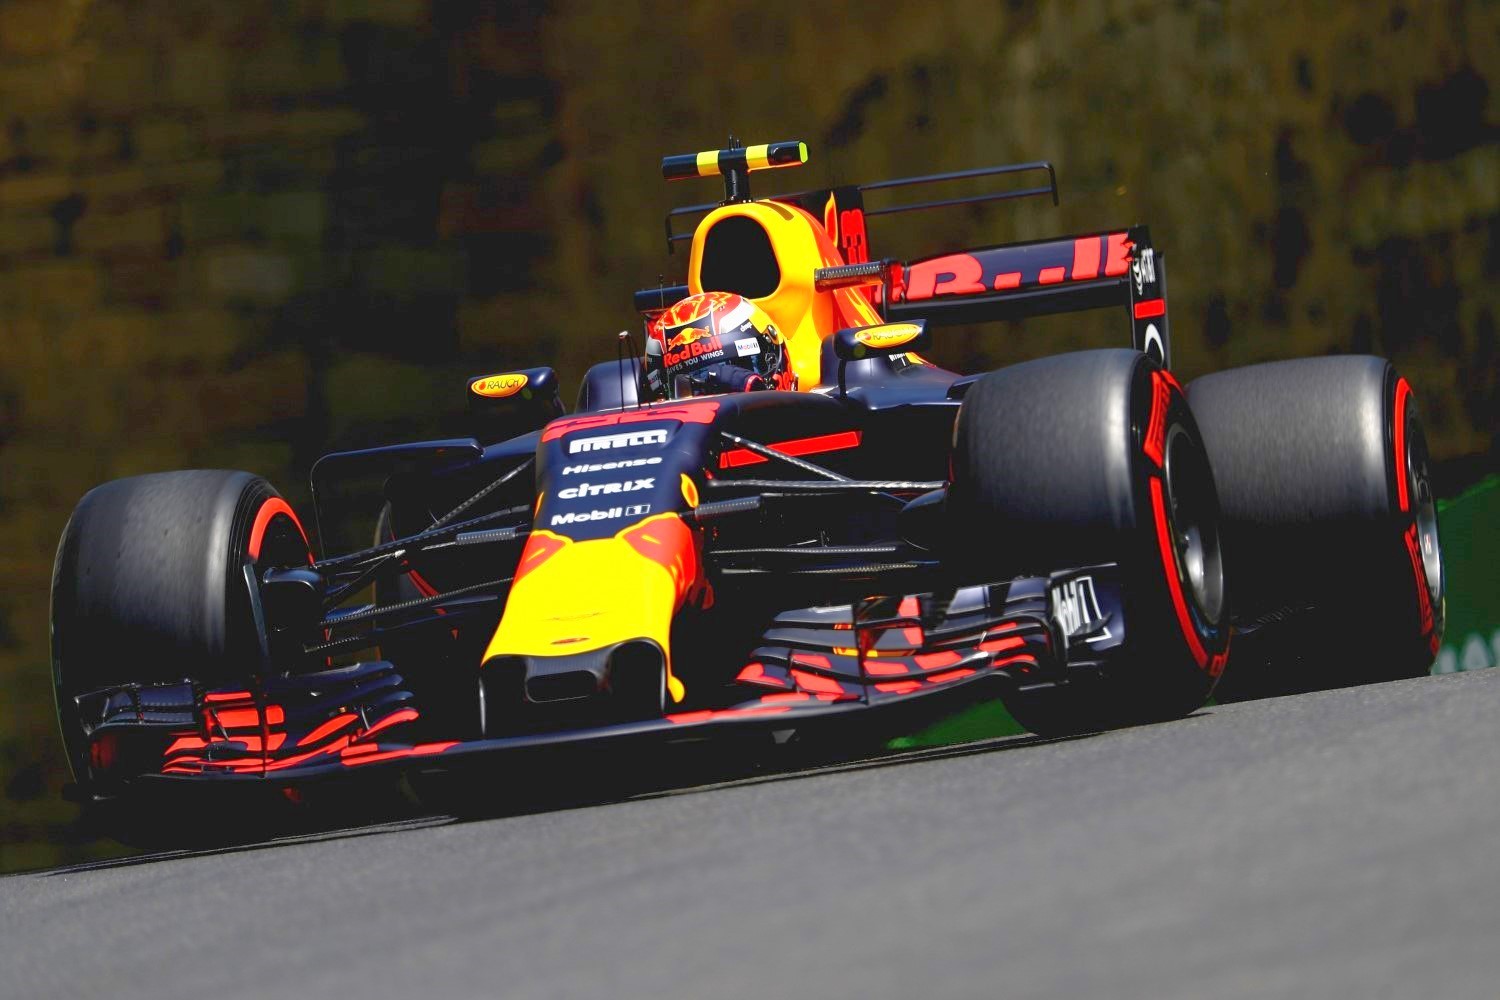 'Mad' Max Verstappen drives like a madman and usually breaks his car or one of his competitors